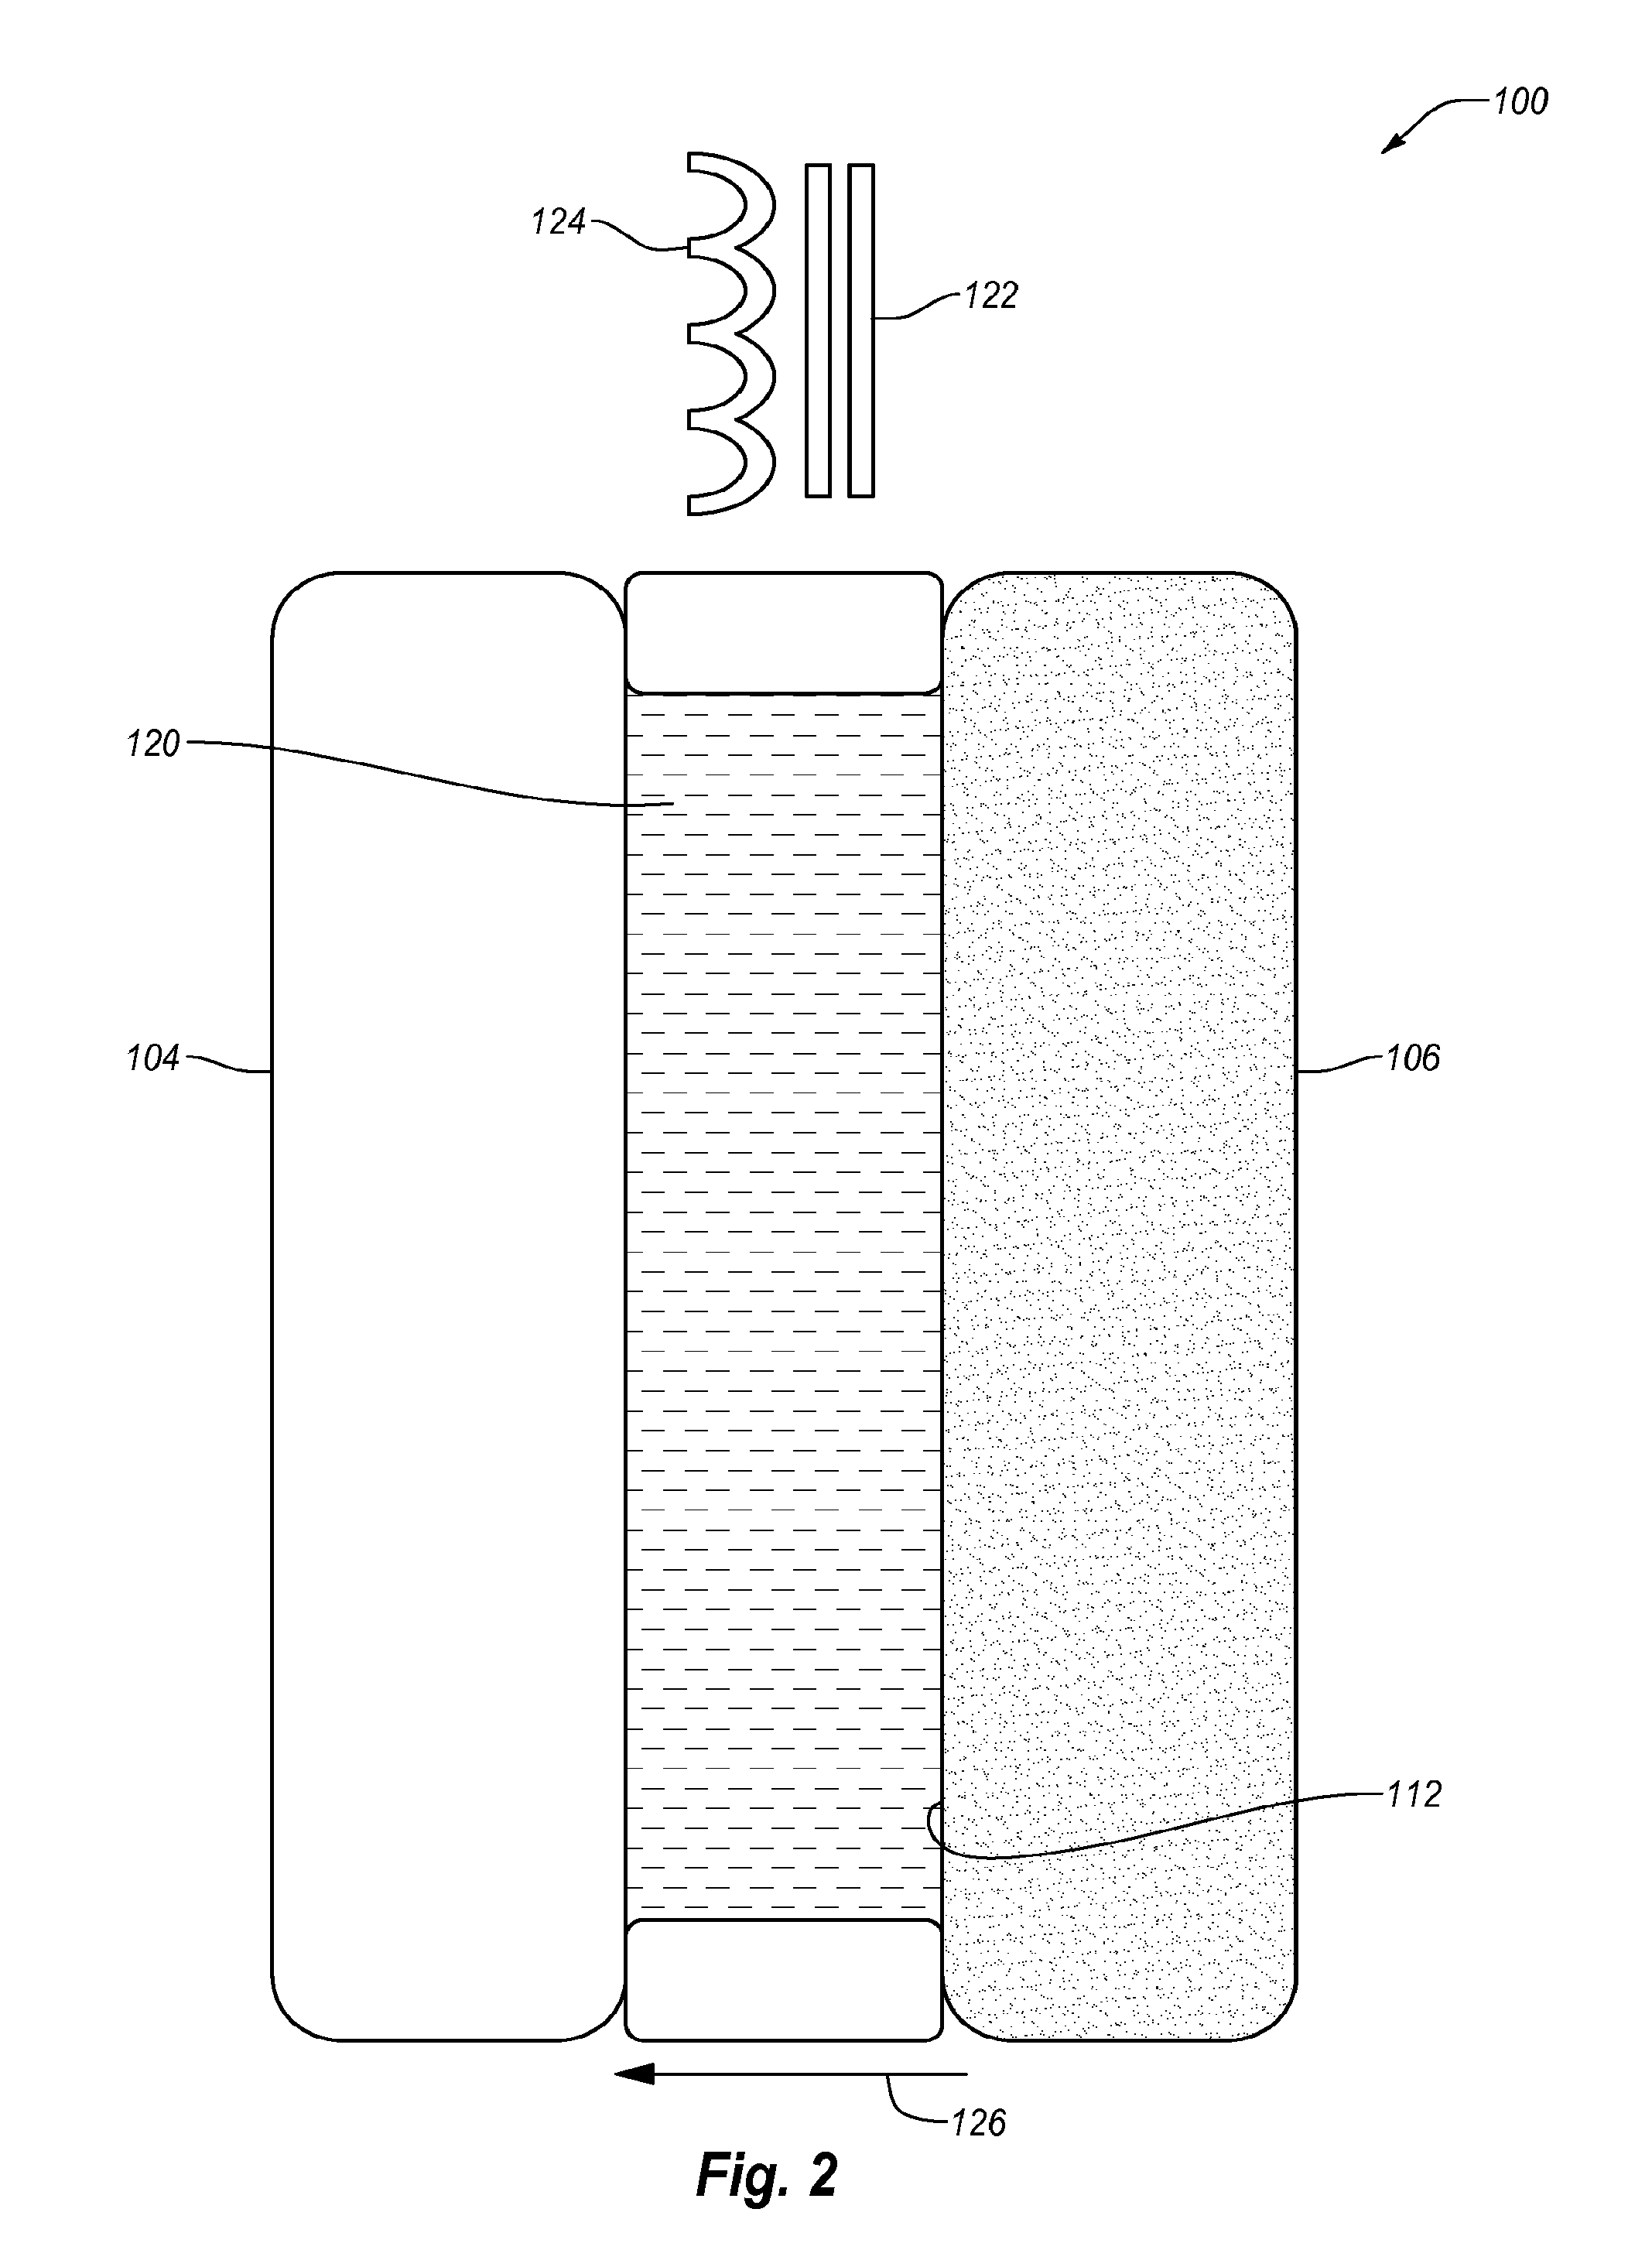 Systems and Methods for Extracting Non-Polar Lipids from an Aqueous Algae Slurry and Lipids Produced Therefrom